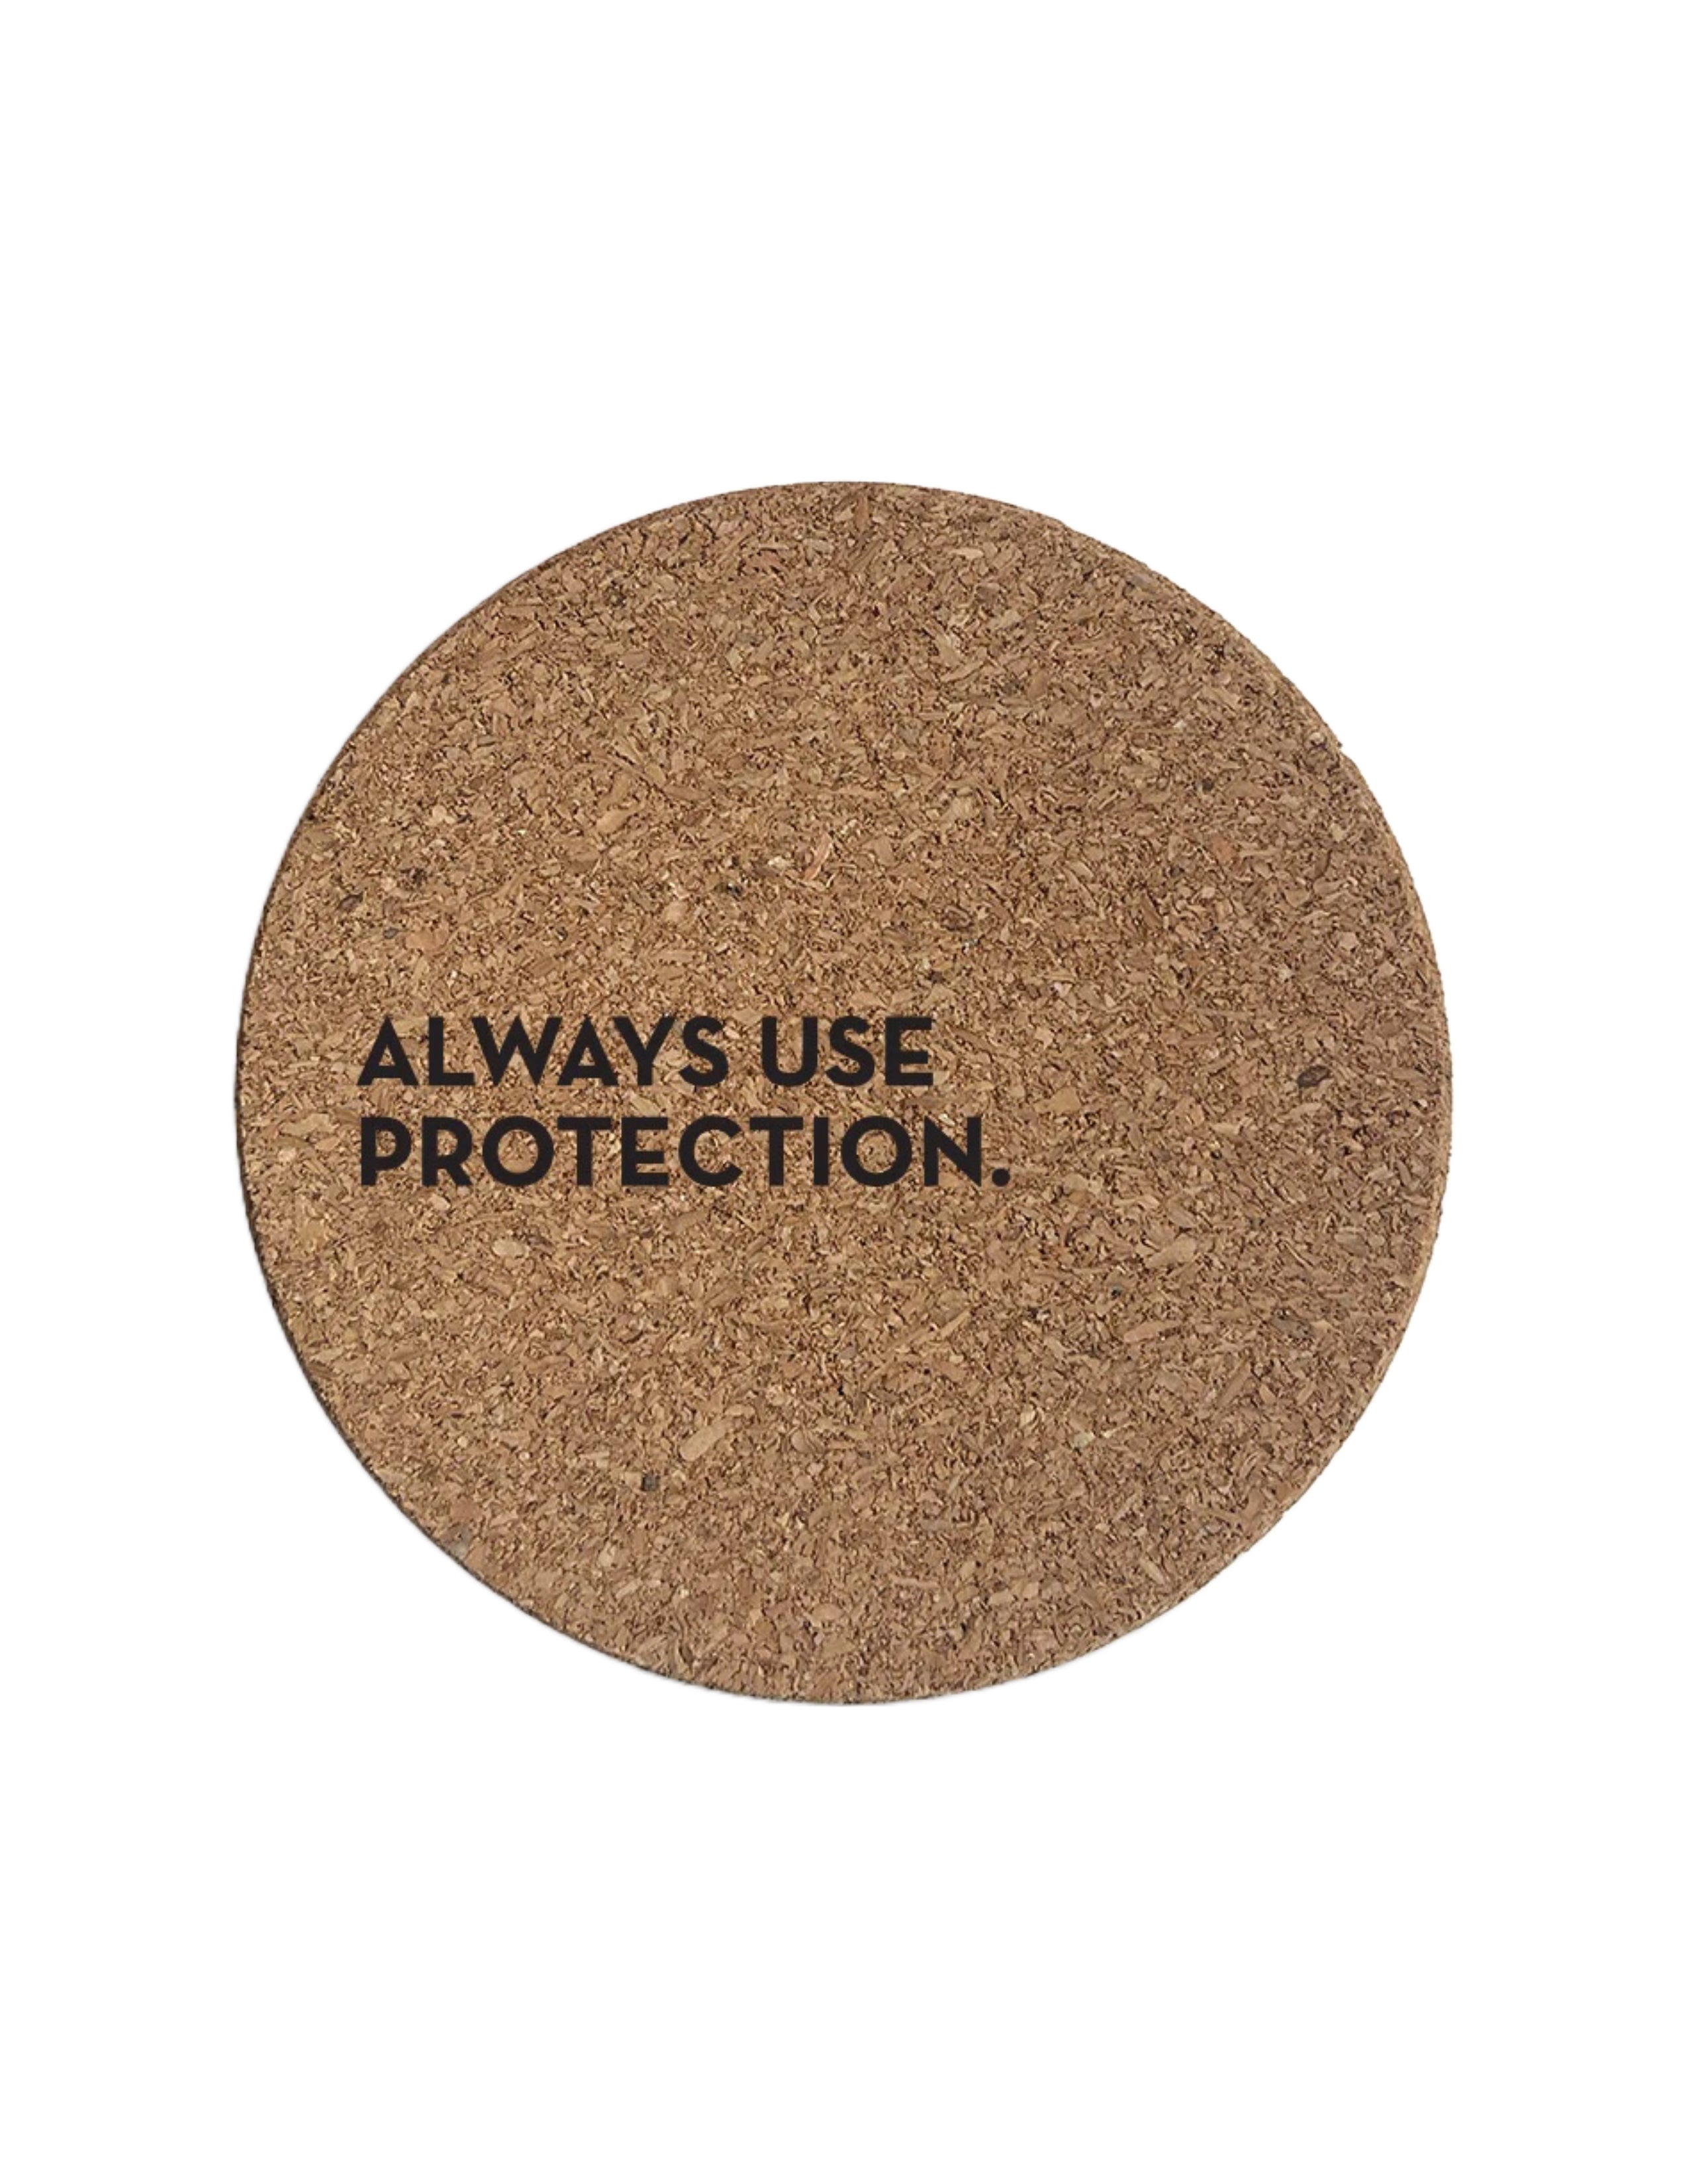 Protection Cork Coasters